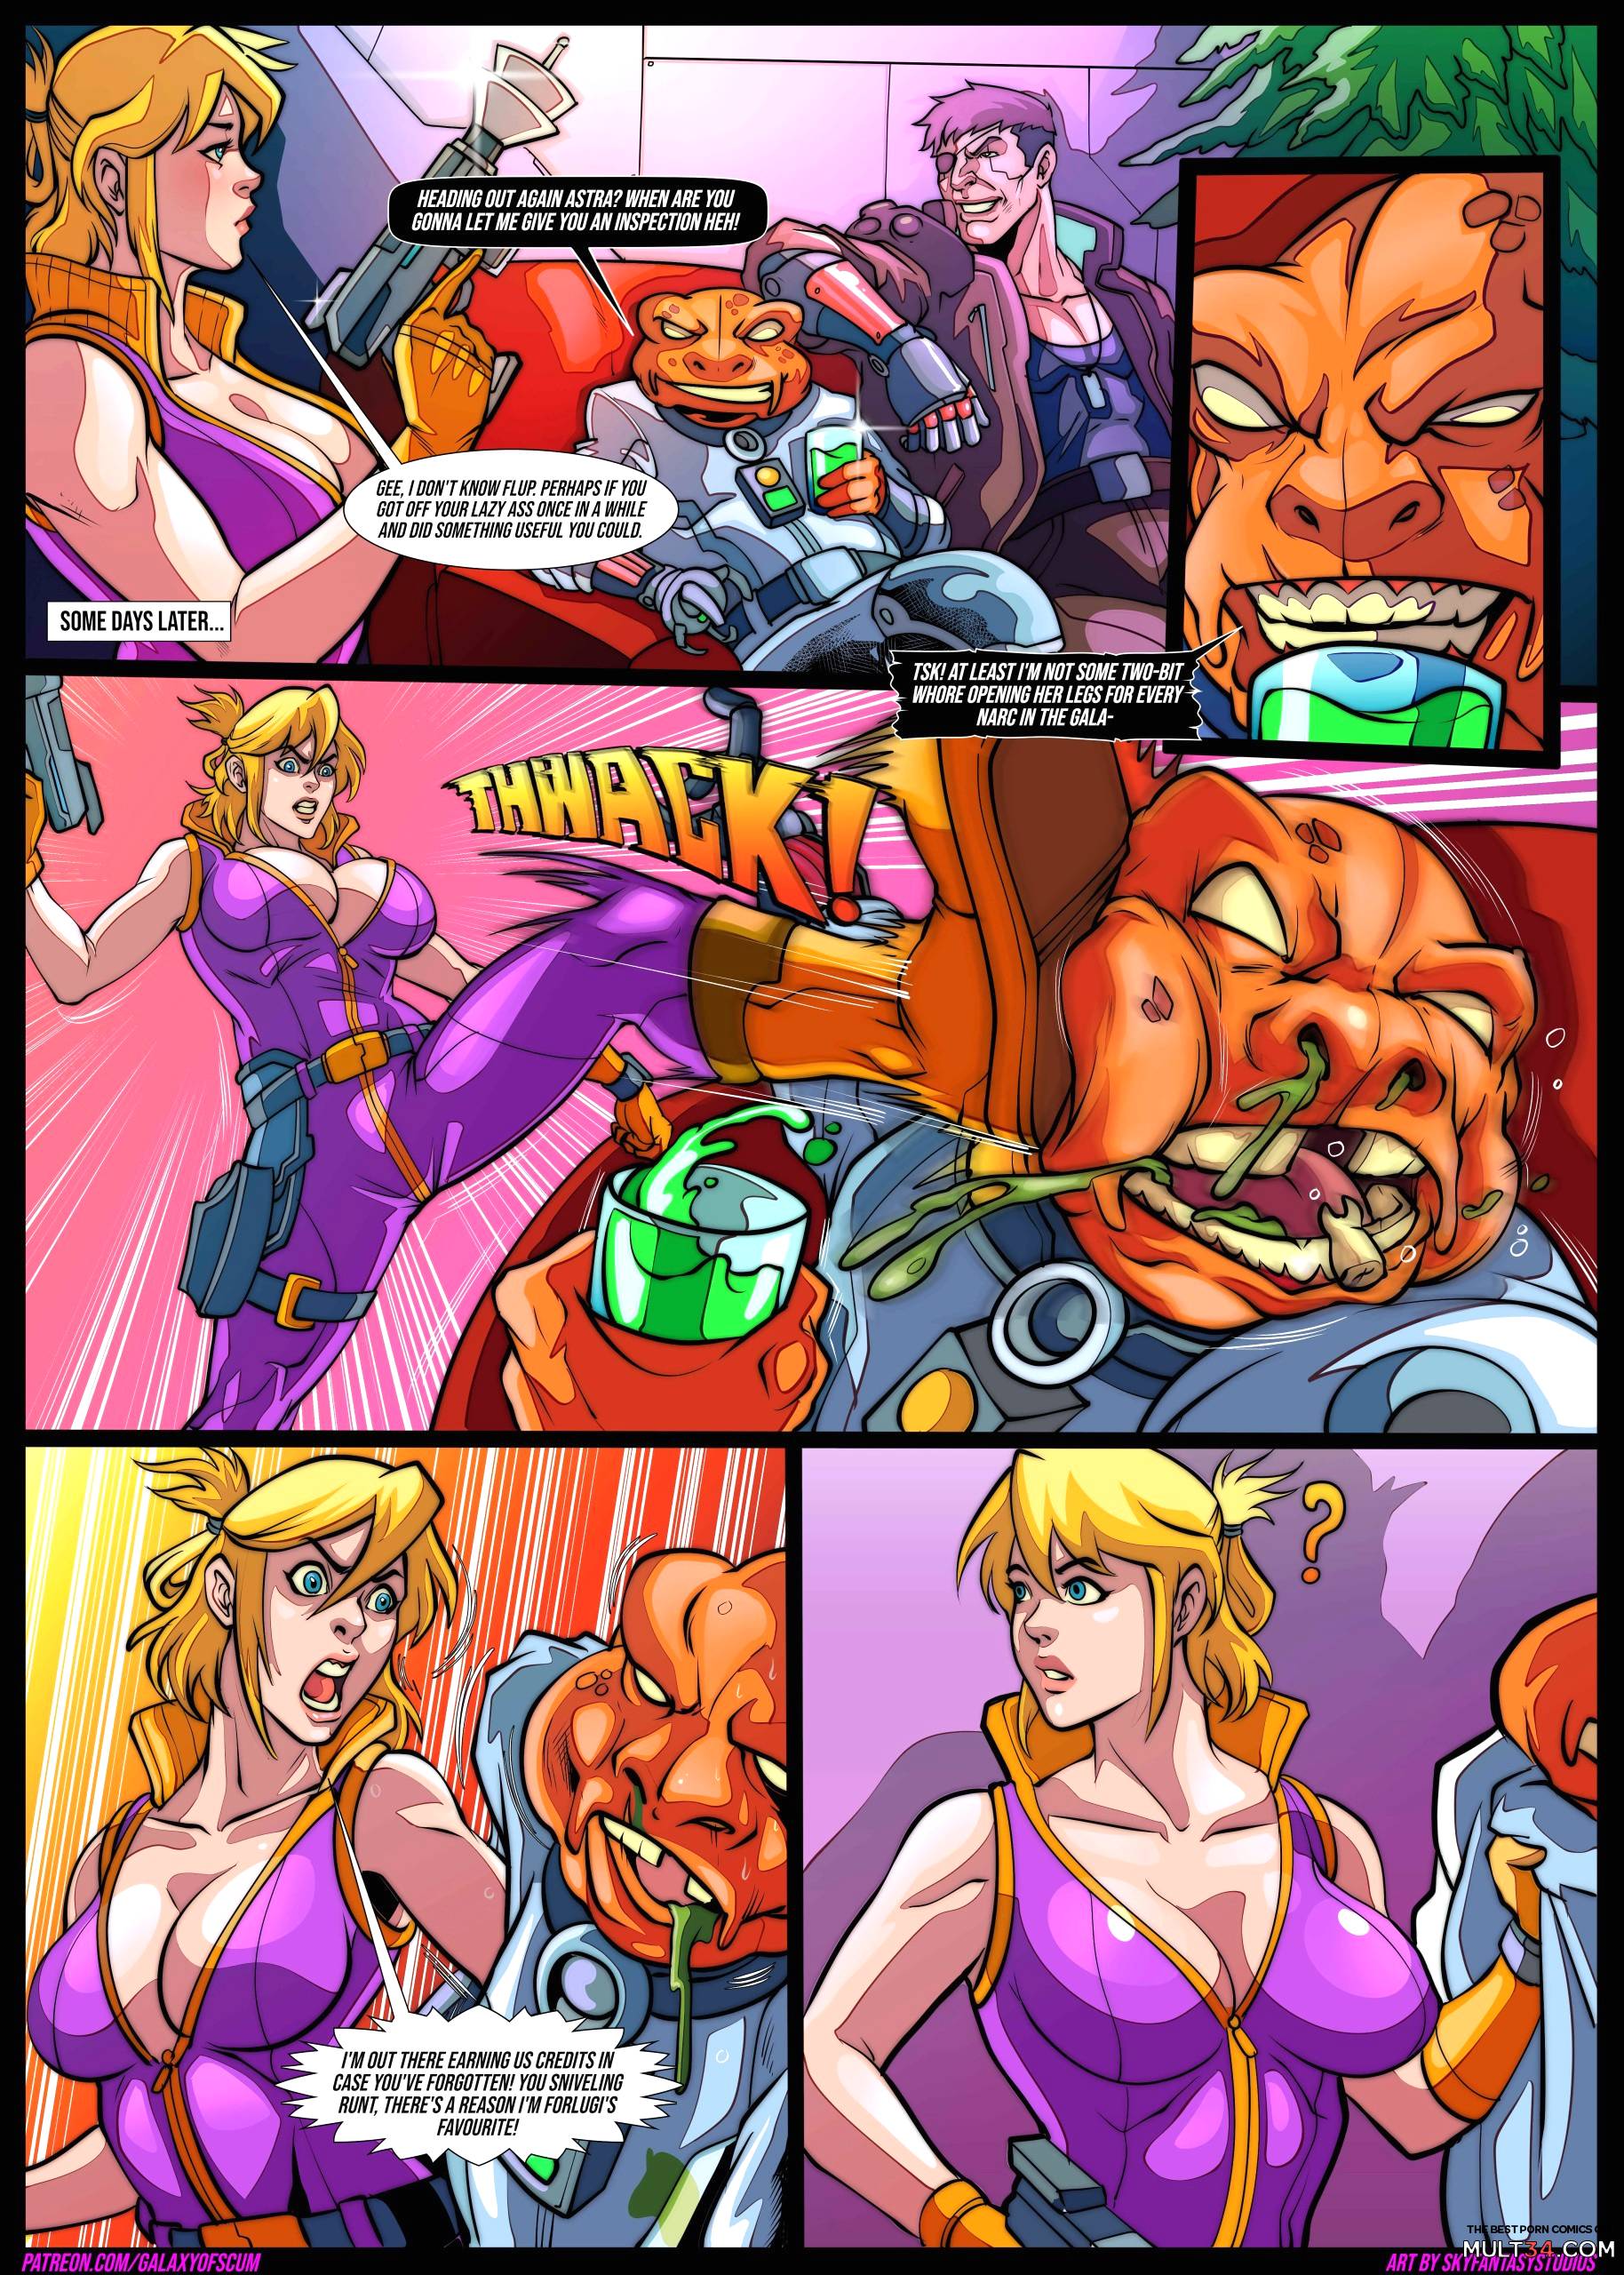 Galaxy of Scum Issue 2: Smuggler's and Bugs page 10